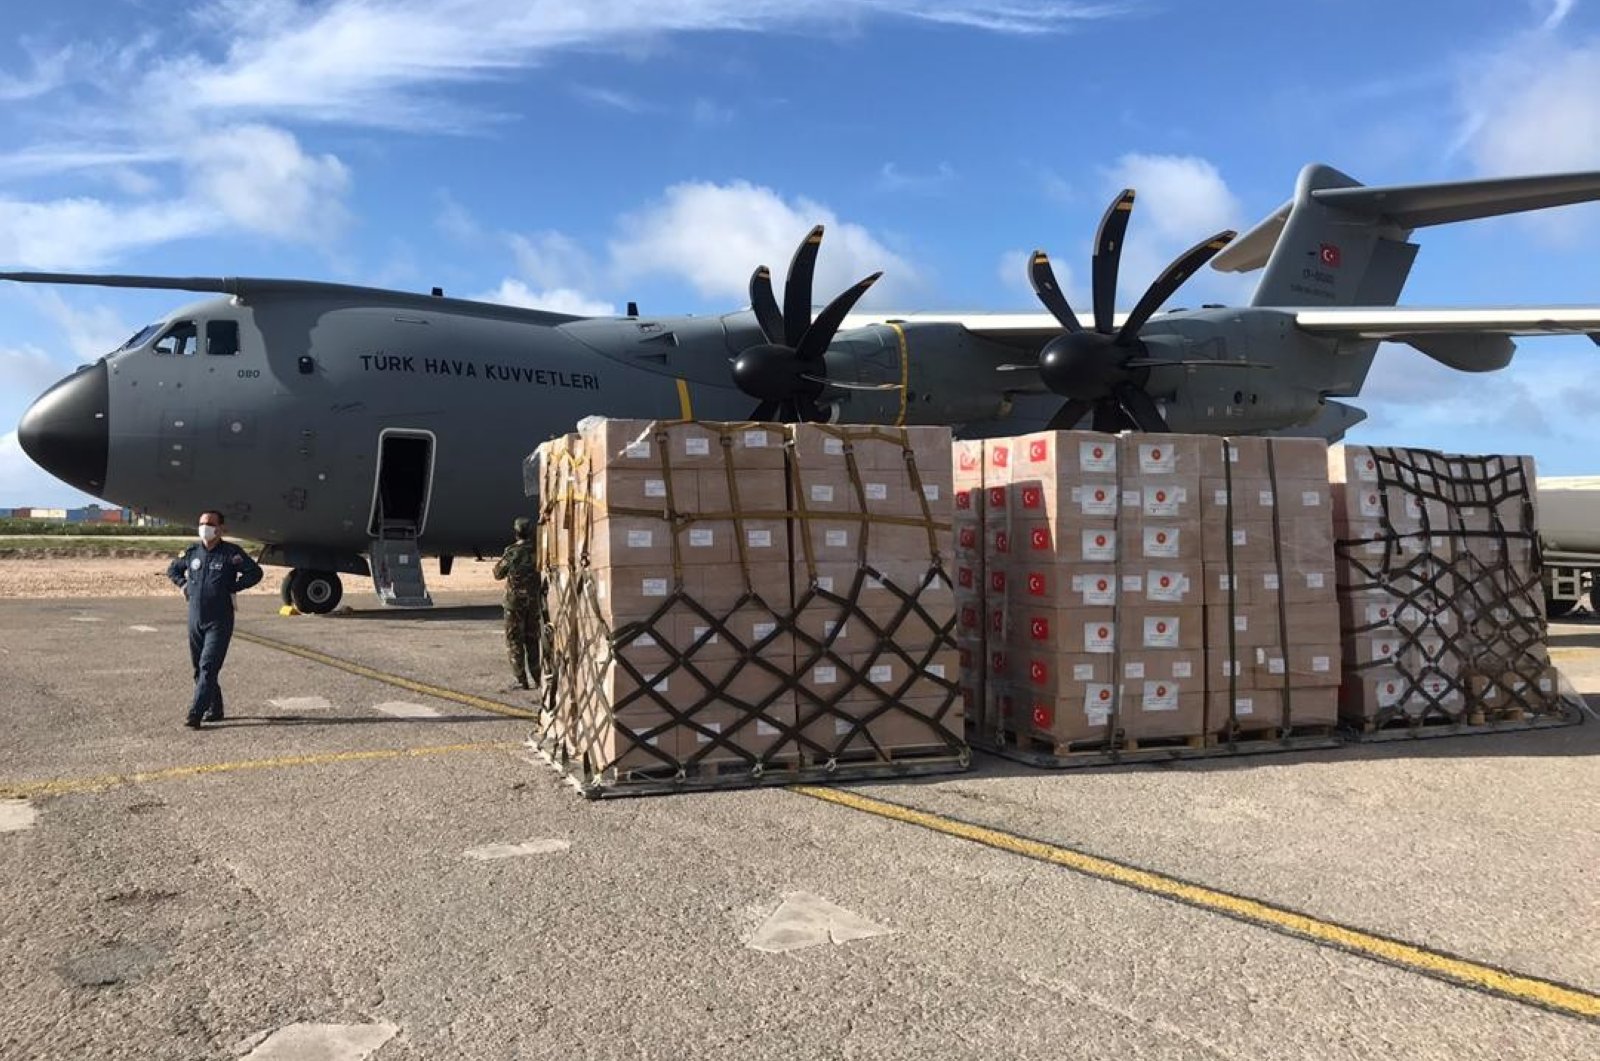 A Turkish military plane being loaded with medical supplies to deliver to Somalia on May 4, 2020 (IHA Photo)